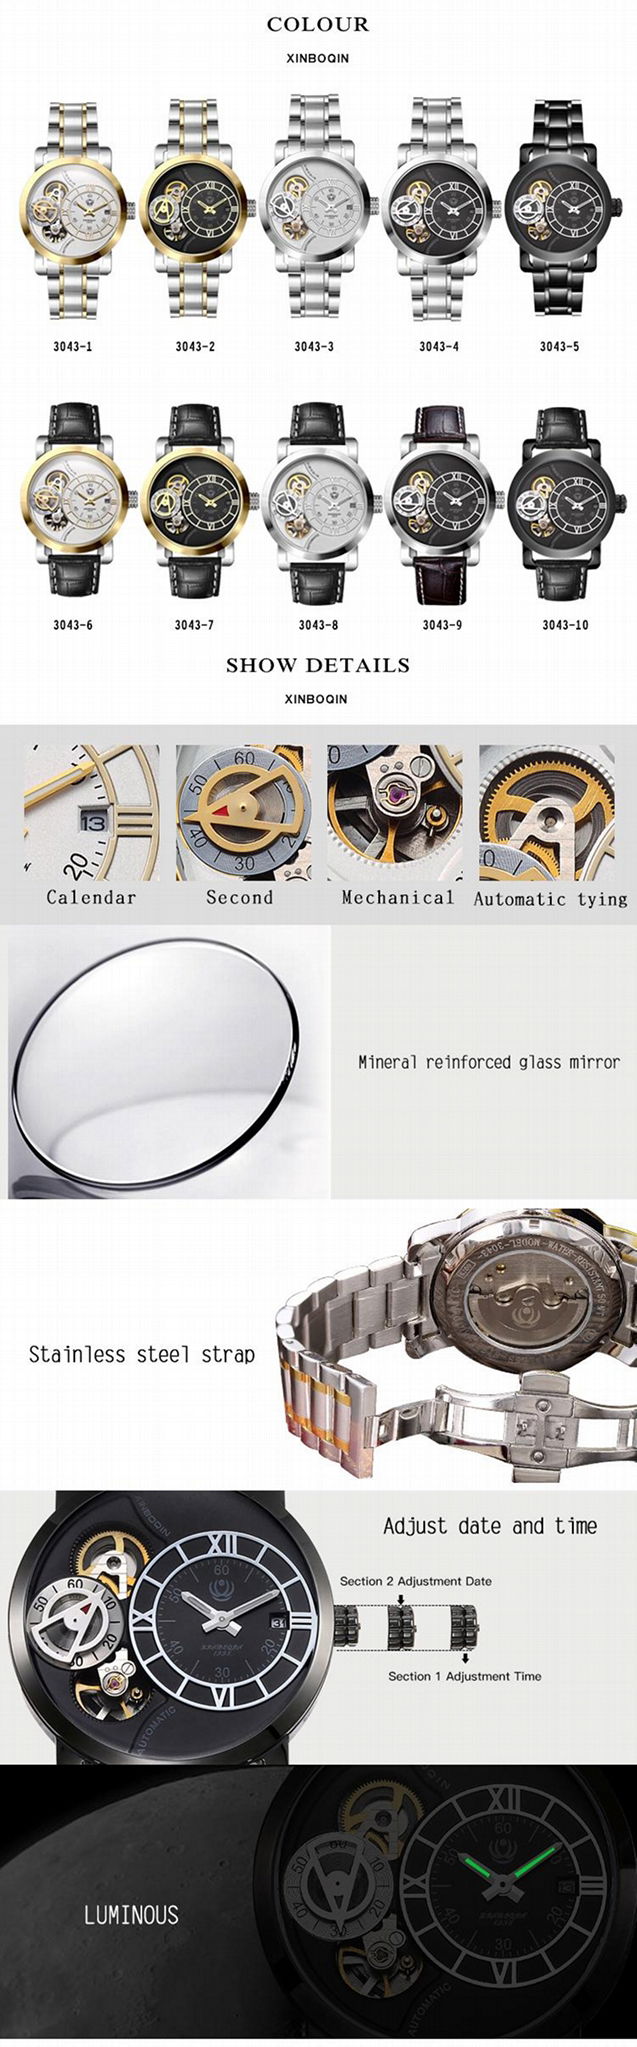 XINBOQIN Wholesale Two Movement Stainless Steel Water Proof Men's Watches 4